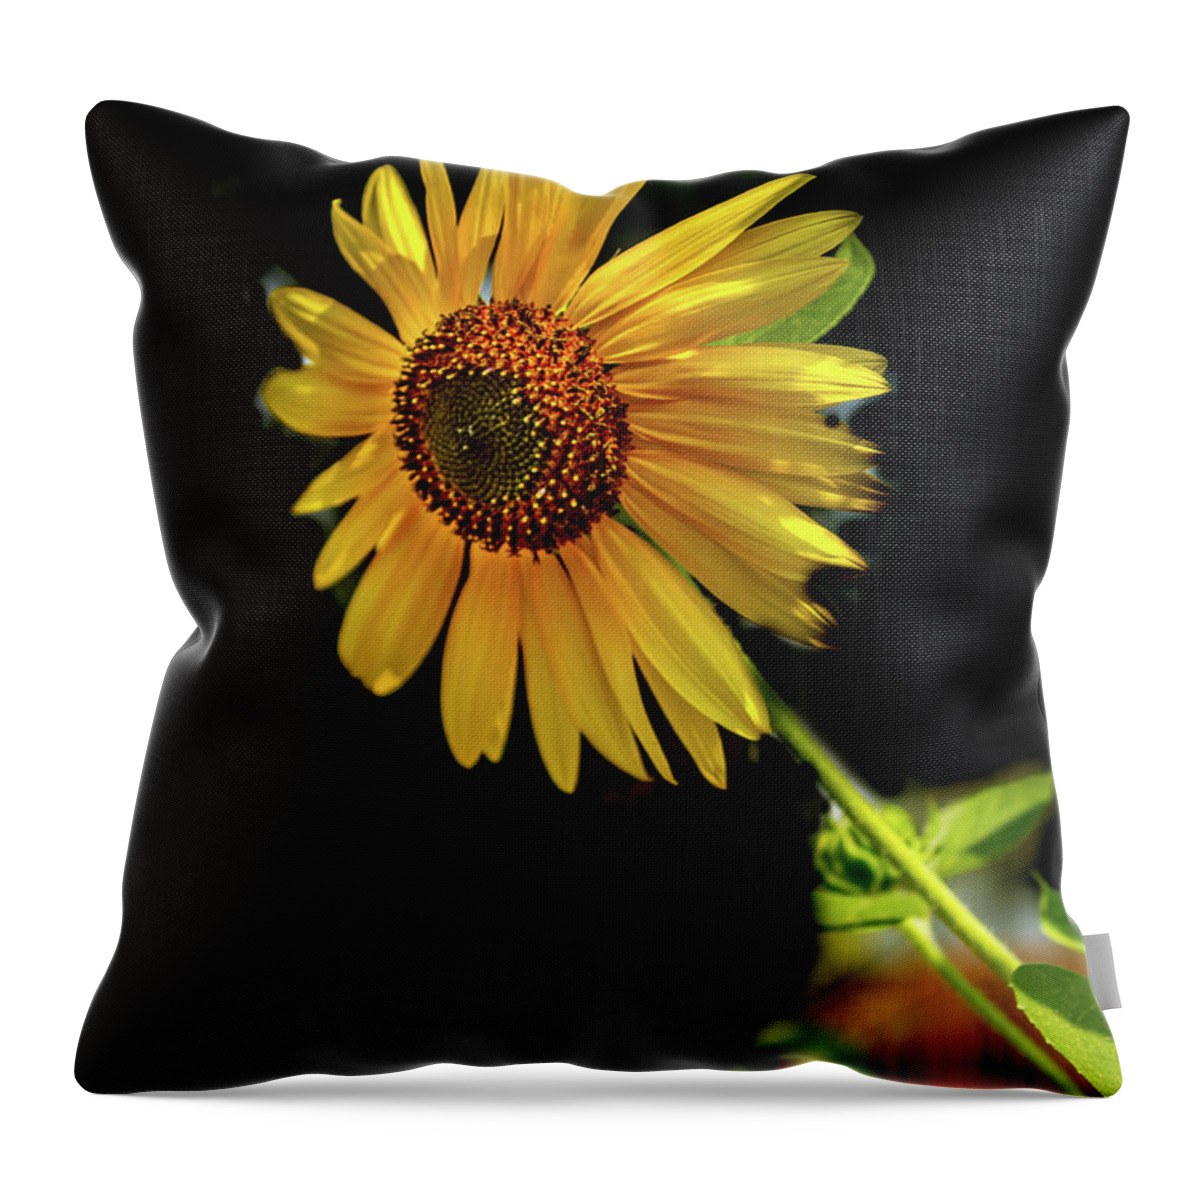 Sunflower Throw Pillow featuring the photograph Sunflower On Black Background by Robert Bales